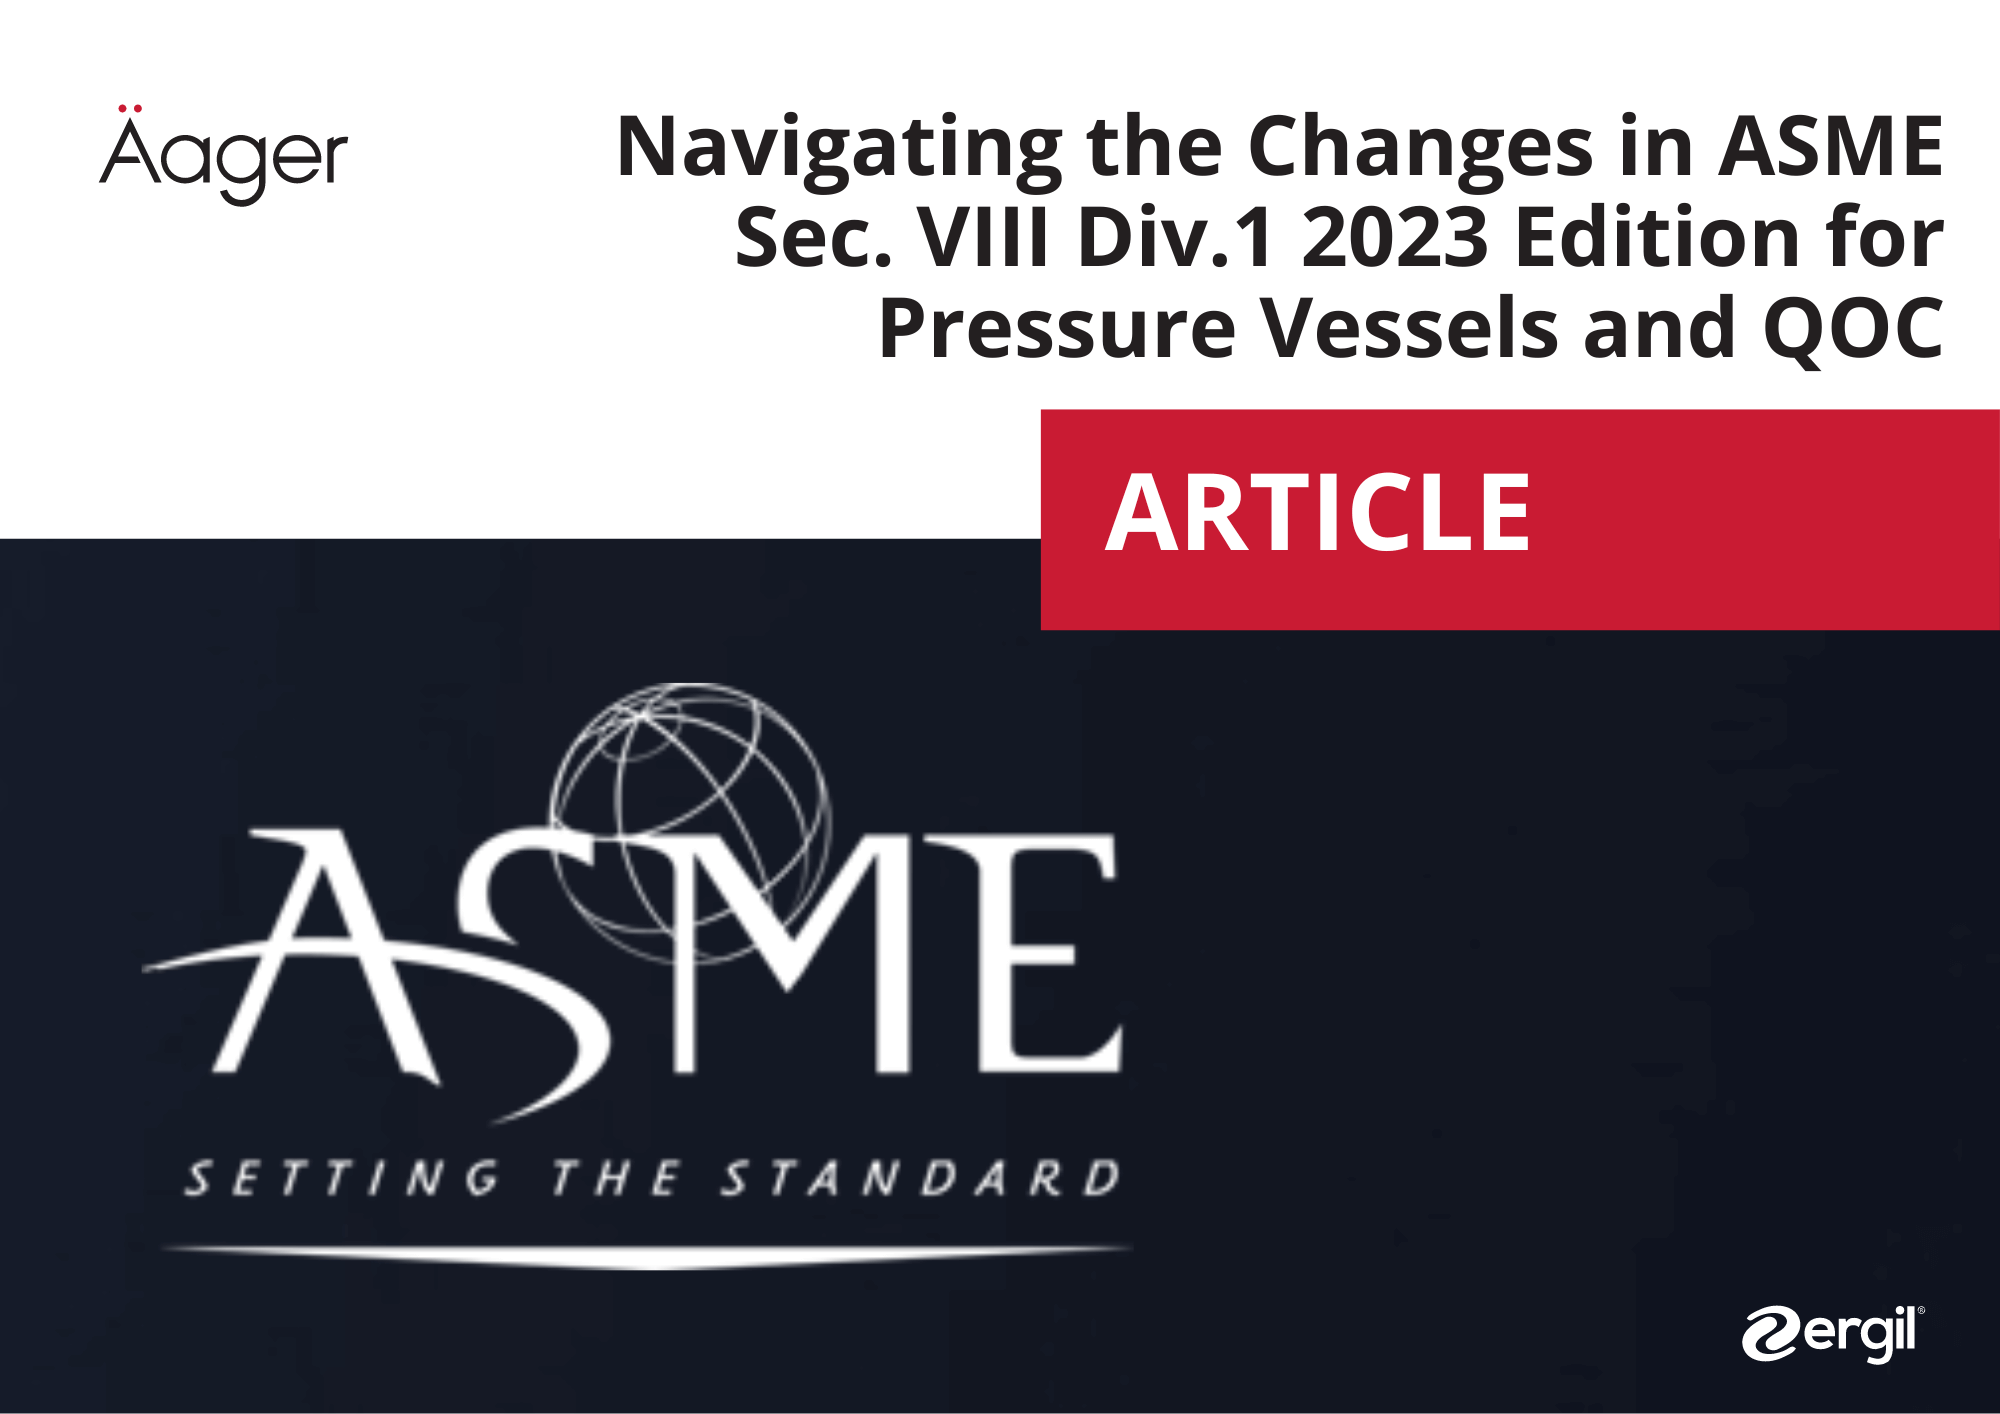 Navigating the Changes in ASME Sec. VIII Div.1 2023 Edition for Pressure Vessels and QOC 32